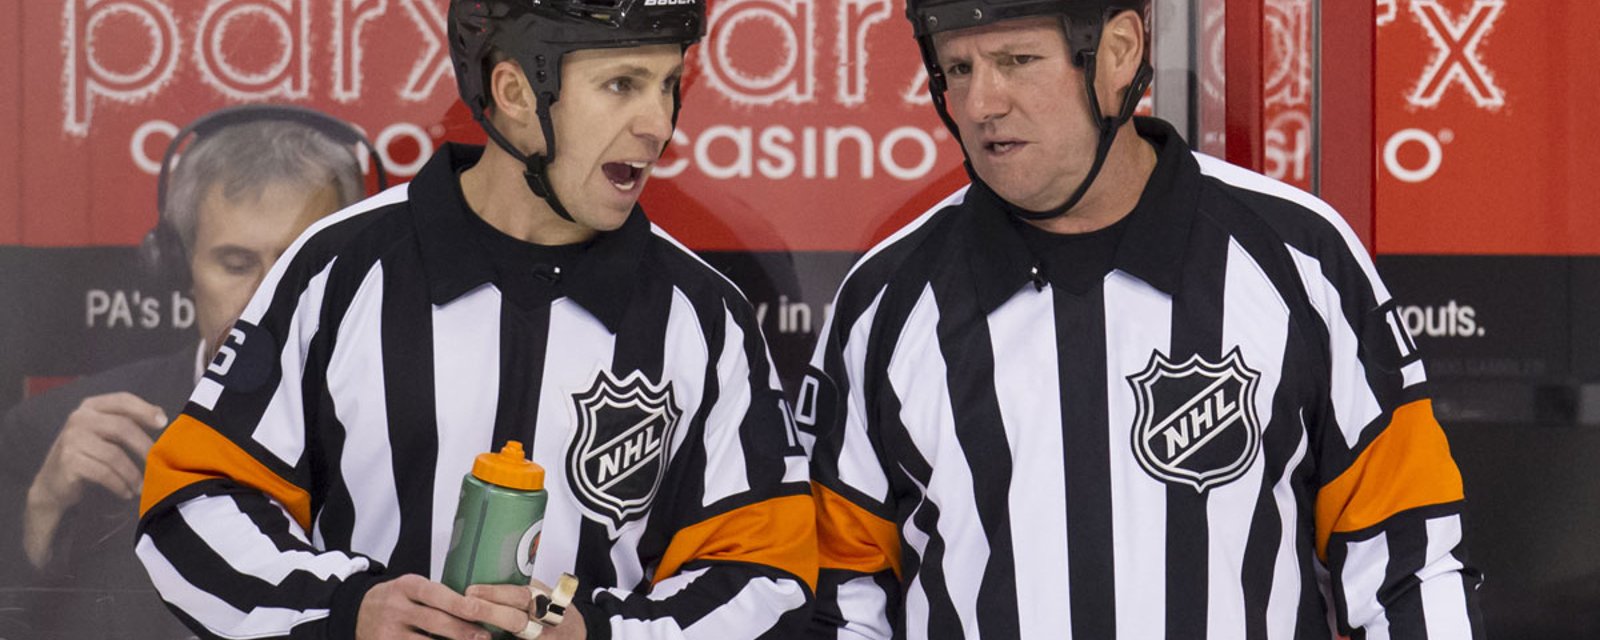 Jets bringing ex-ref into staff to counter NHL crackdown